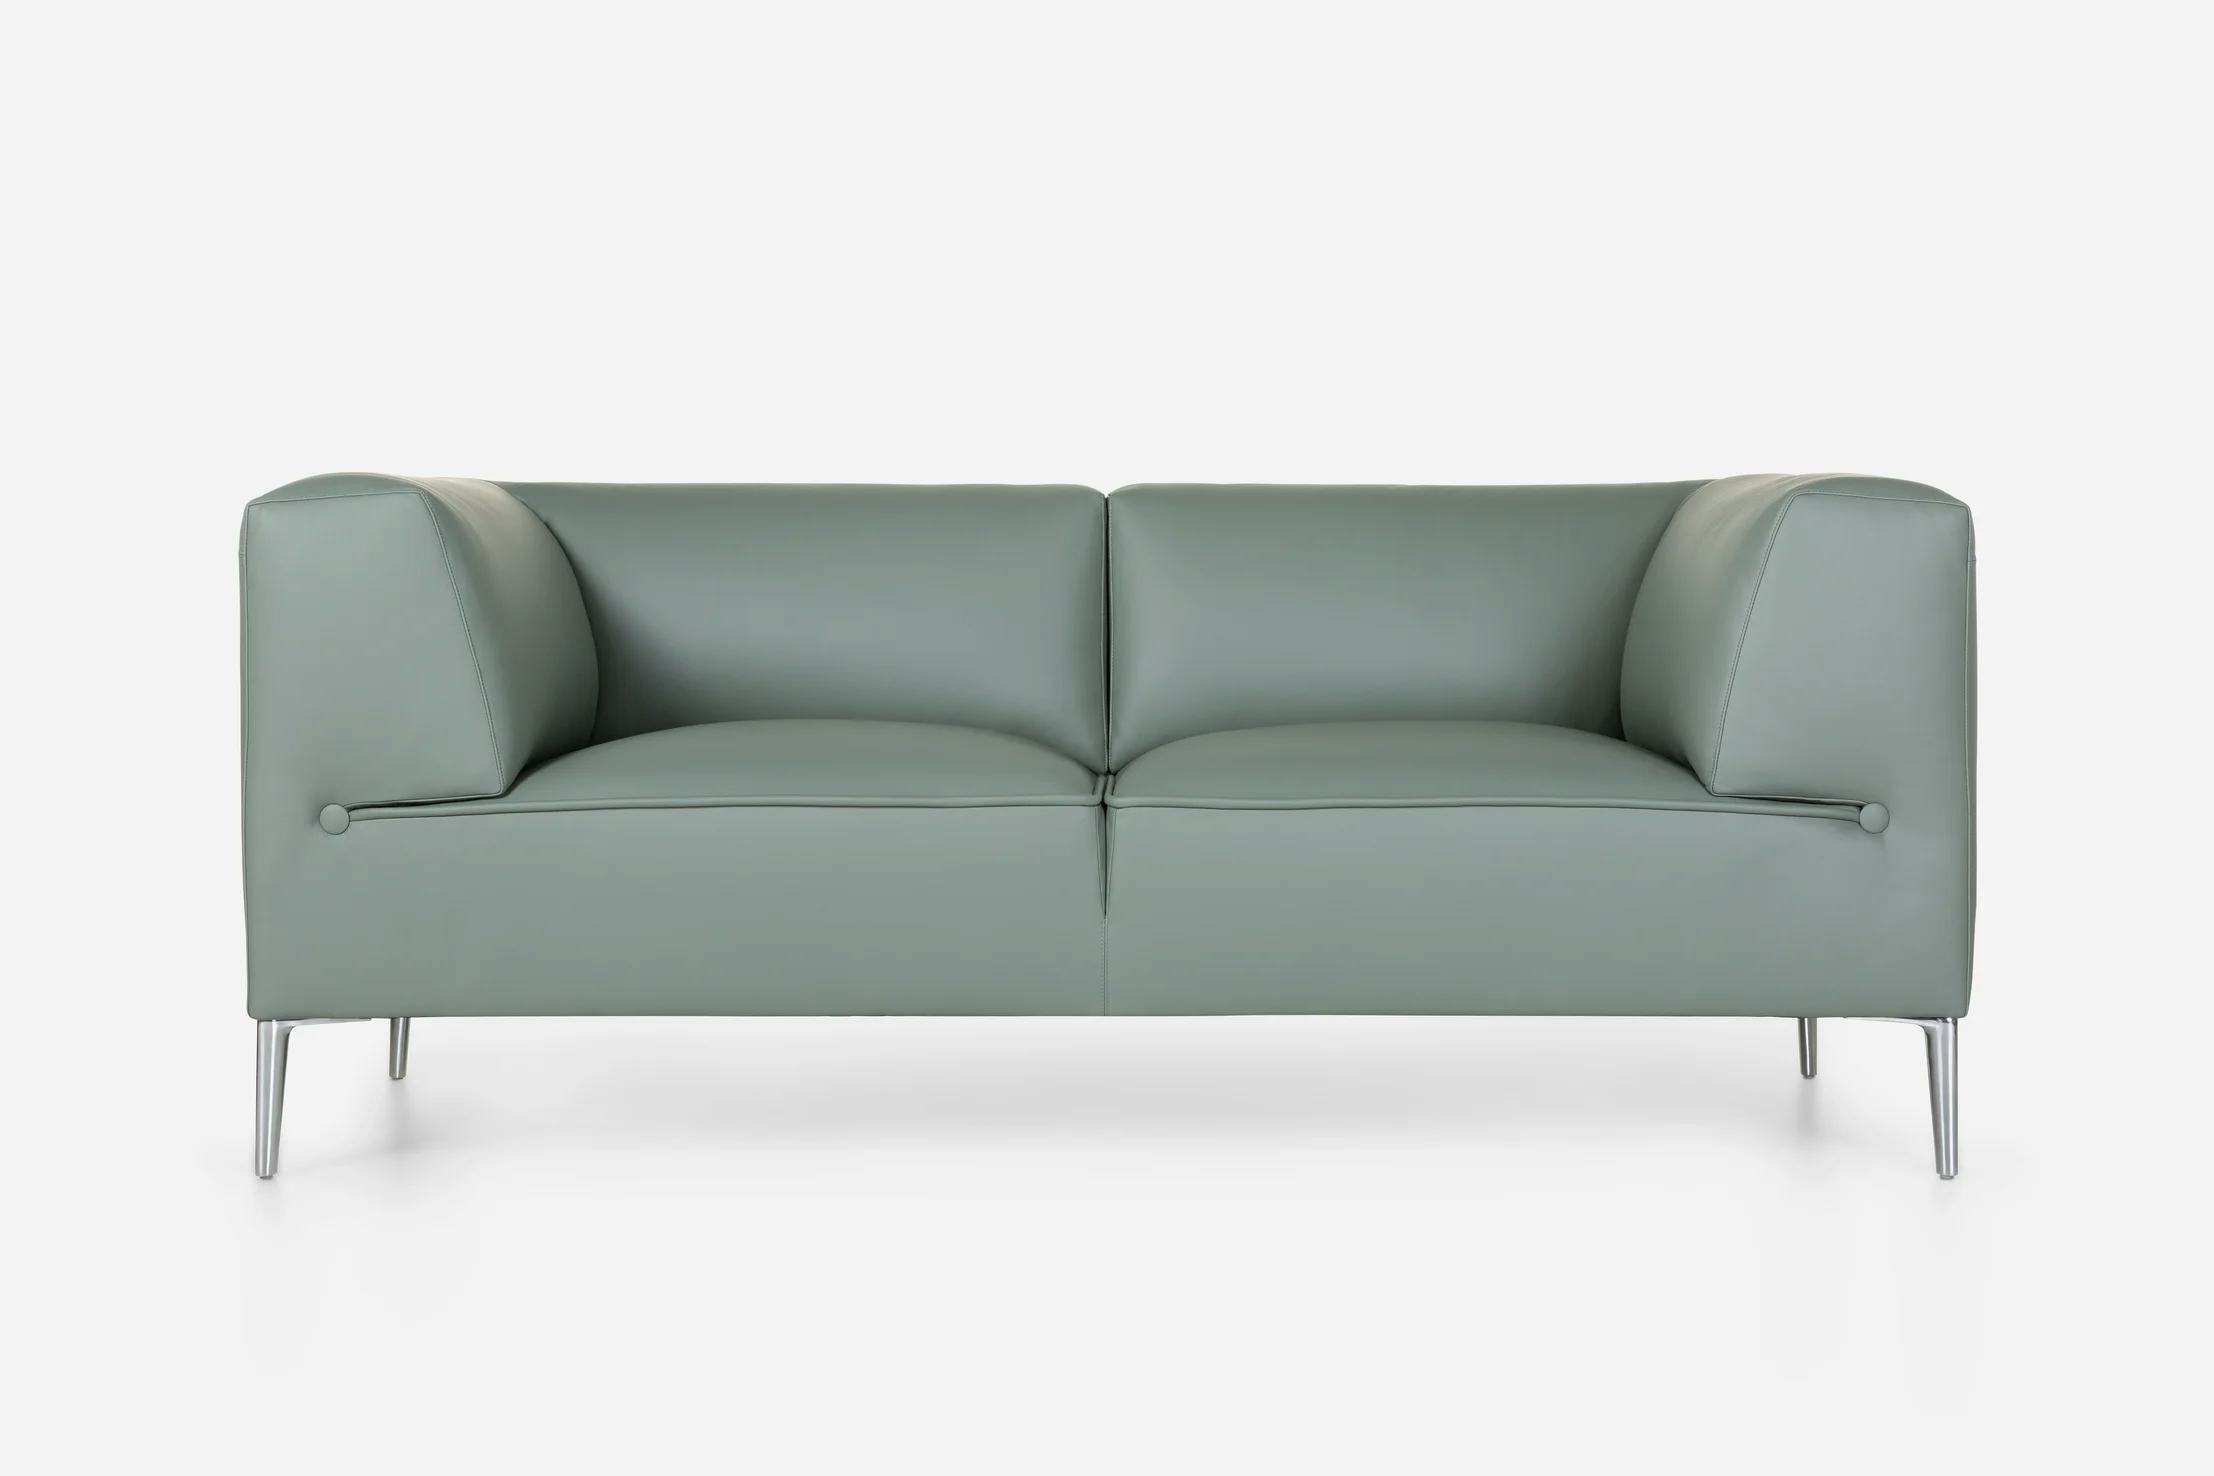 Sofa So Good Spectrum agave double seater front view